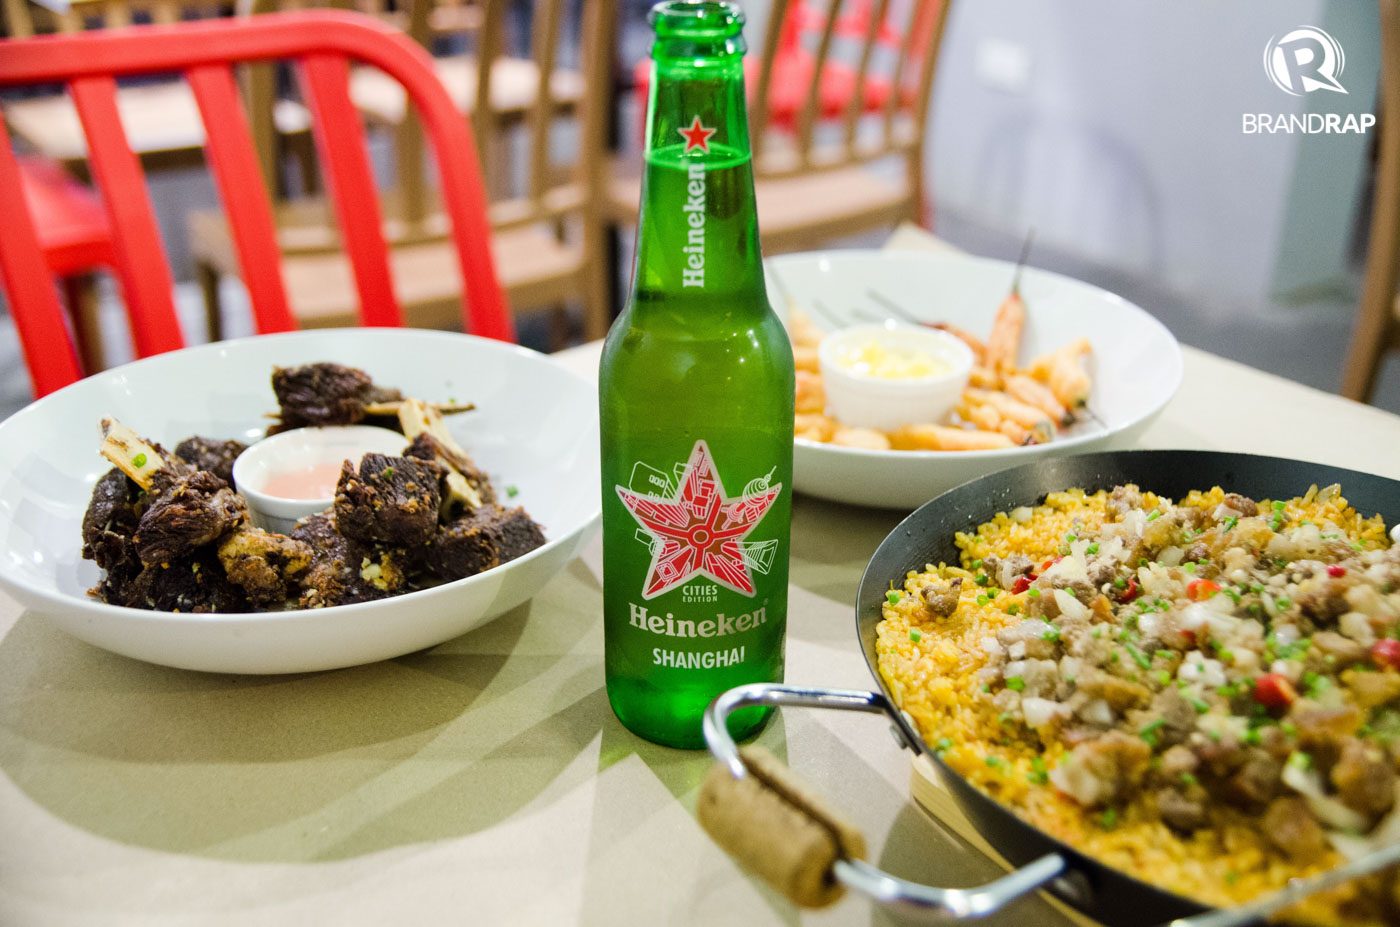 MEALS FOR GROUPS. Enjoy a cold bottle of beer with Minokaua fare like beef riblets, chili bombs, and Sisig Minokaua Rice. Other specialties include the Solar Eclipse (spicy rice cooked with siling labuyo), Lunar Eclipse (paella negra), and mussel pots. Photo by Pauee Cadaing/Rappler 